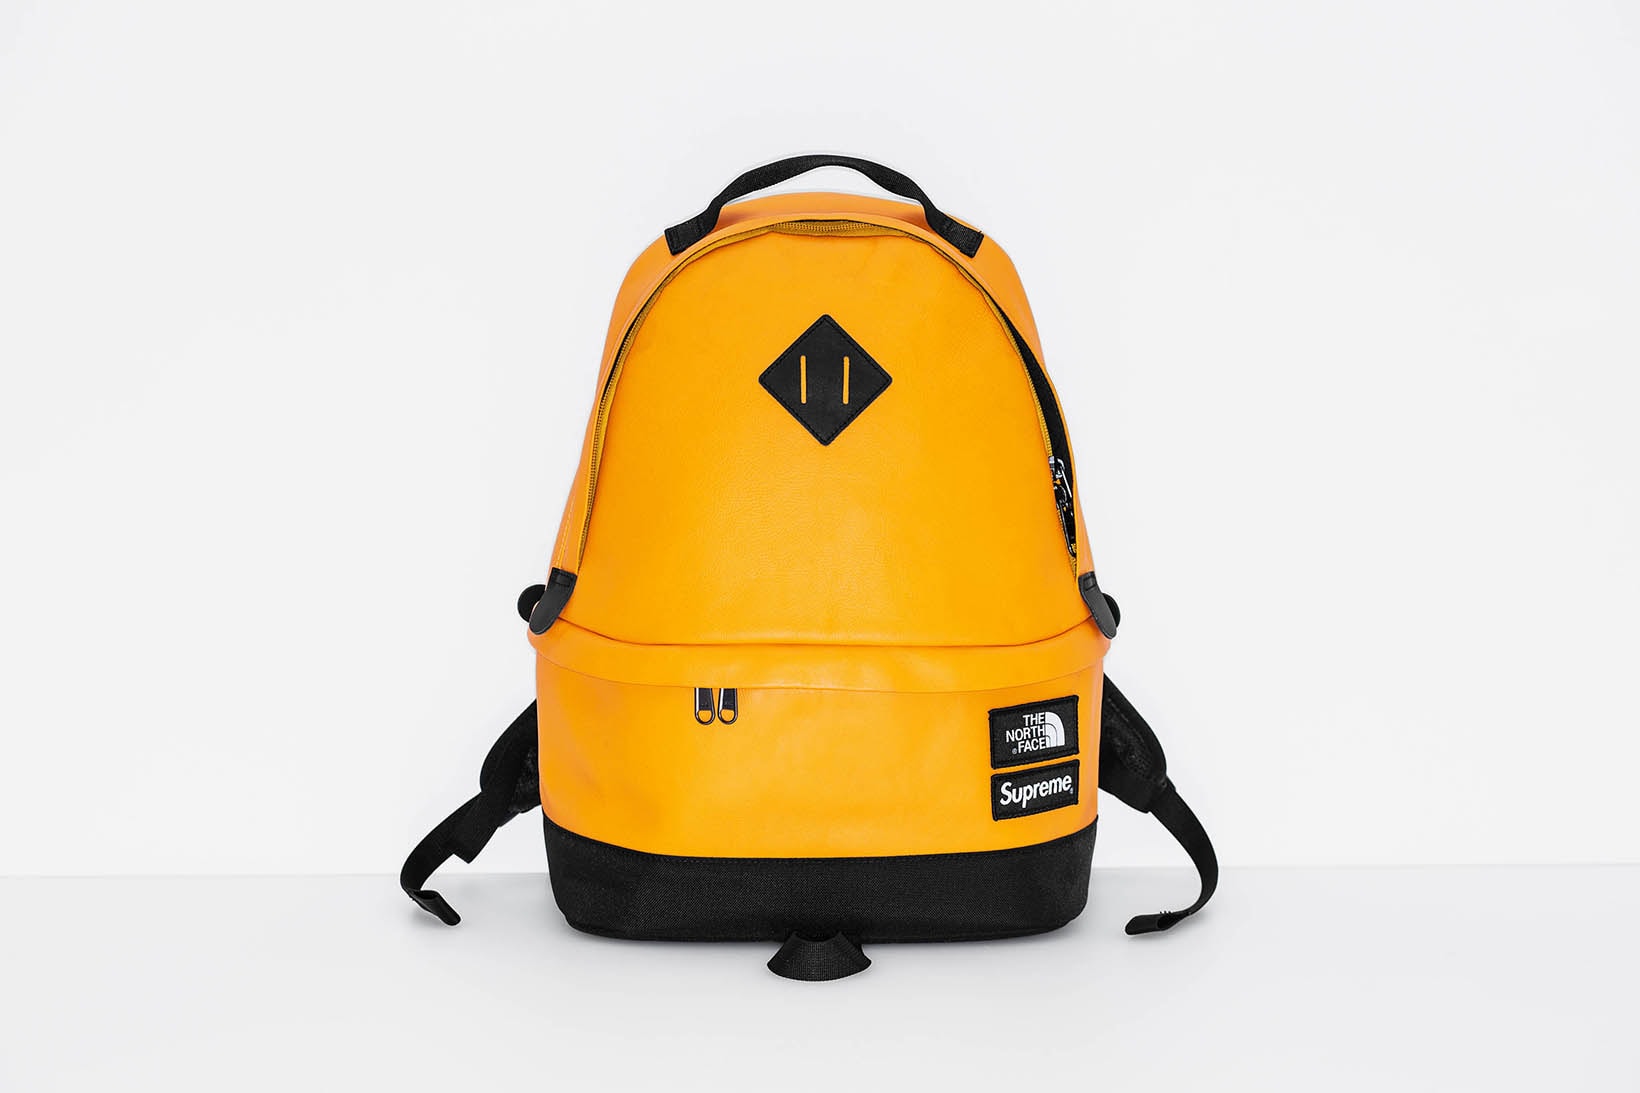 Supreme x The North Face 2017 Fall Yellow Backpack